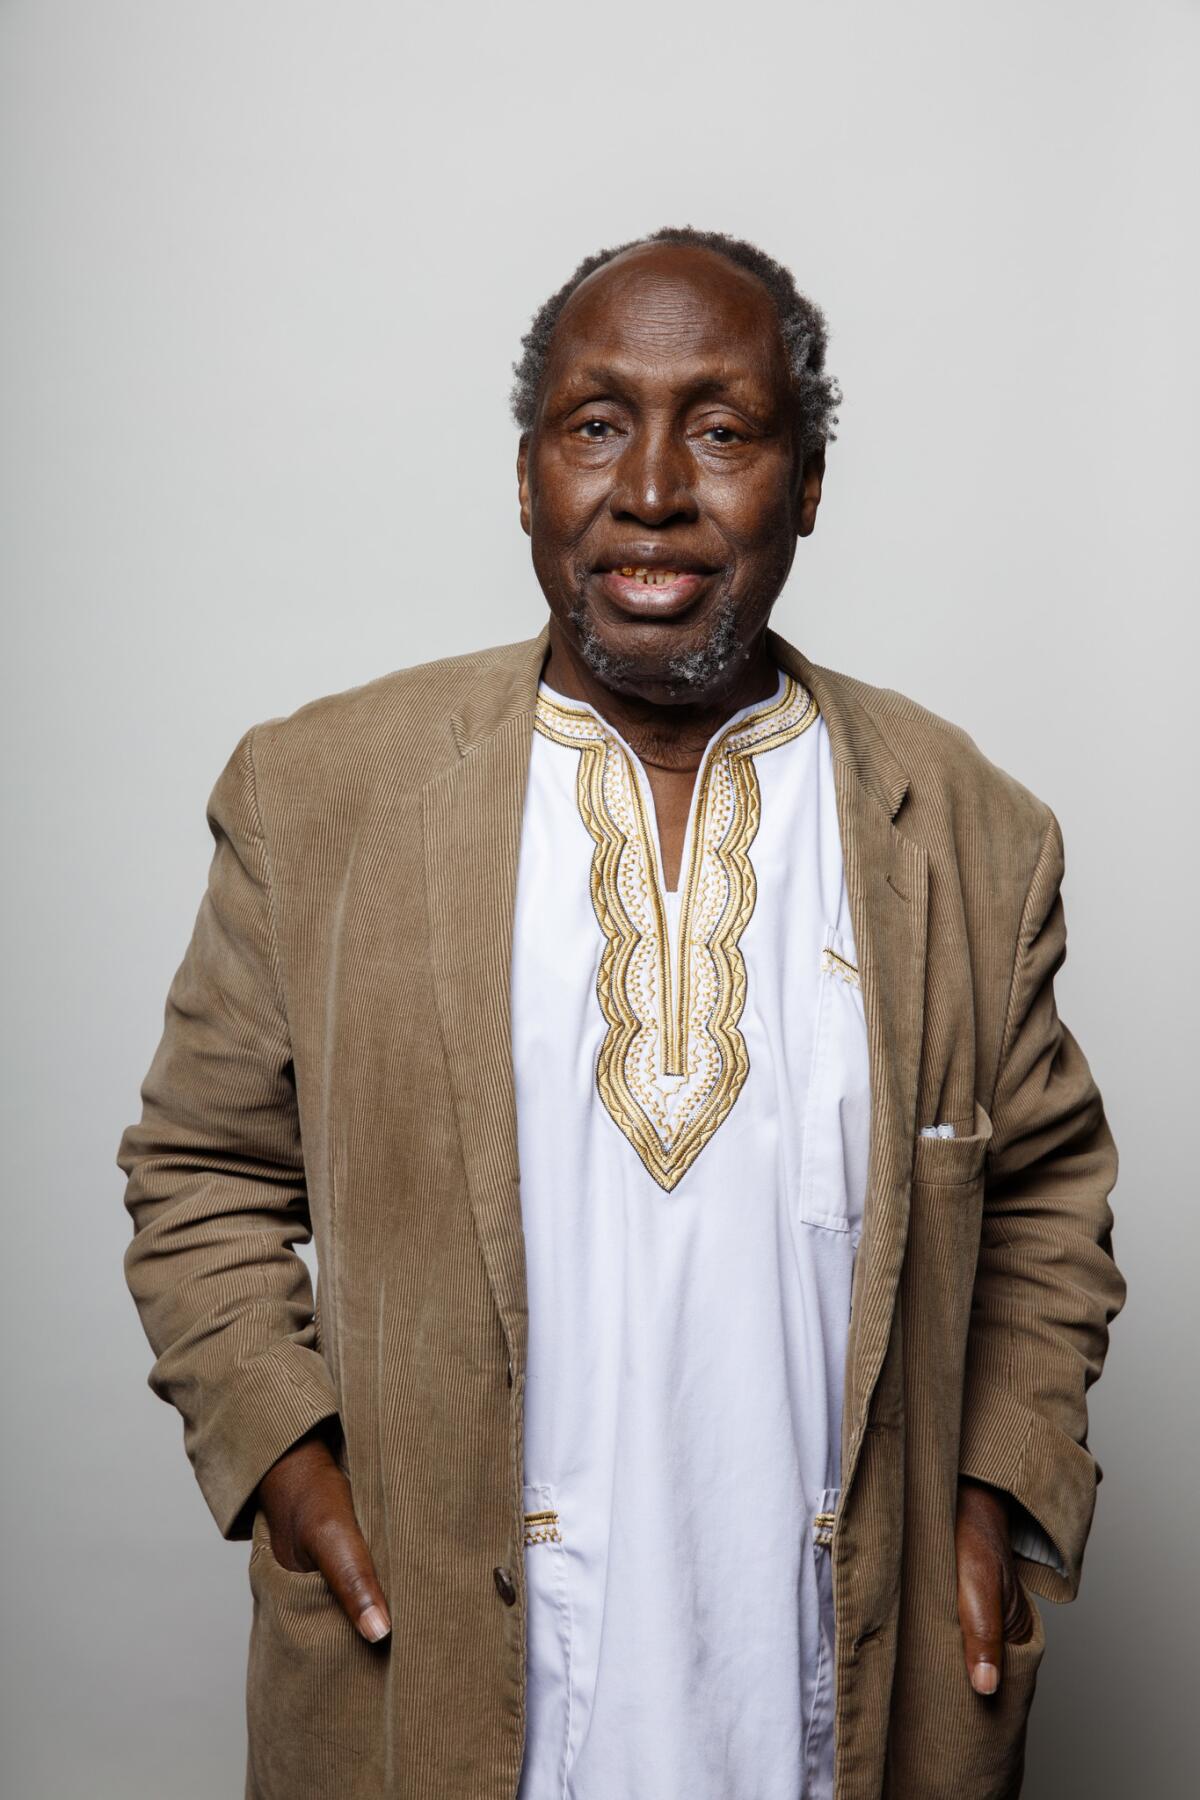 Ngugi wa Thiong'o, author of "Wrestling with the Devil: A Prison Memoir."